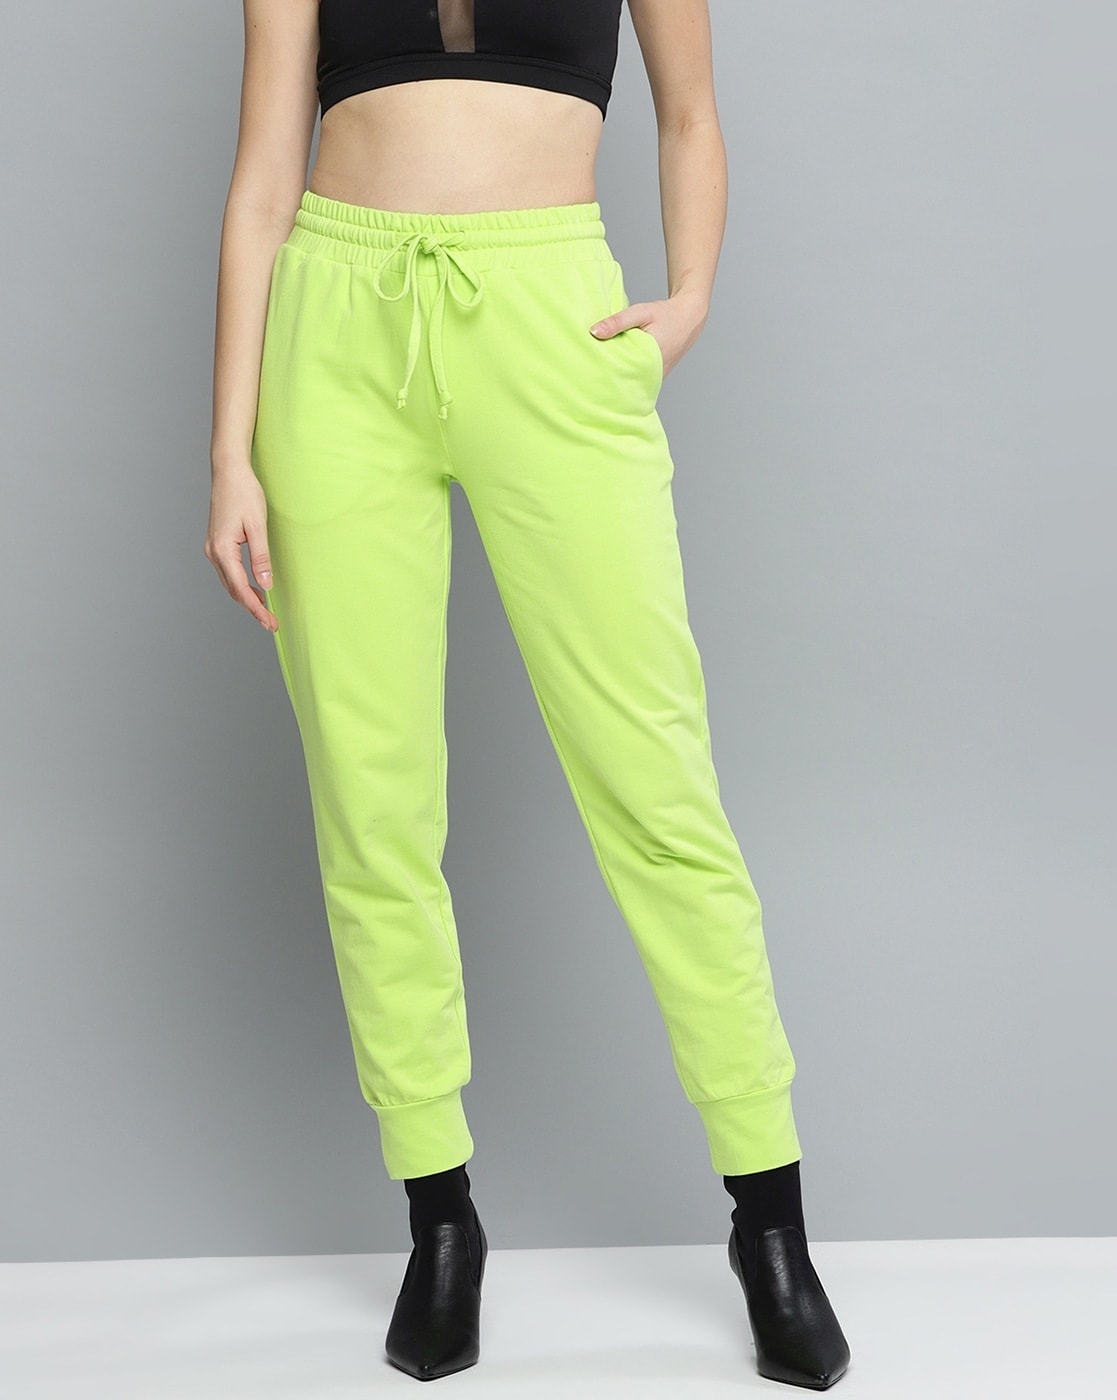 FASHION AND YOUTH Casual Regular Premium Gym Sports Yoga Workout Slim Fit  Running Printed Neon Green Joggers Track Pants  Fashionable Stylish Latest  Collections  Amazonin Clothing  Accessories